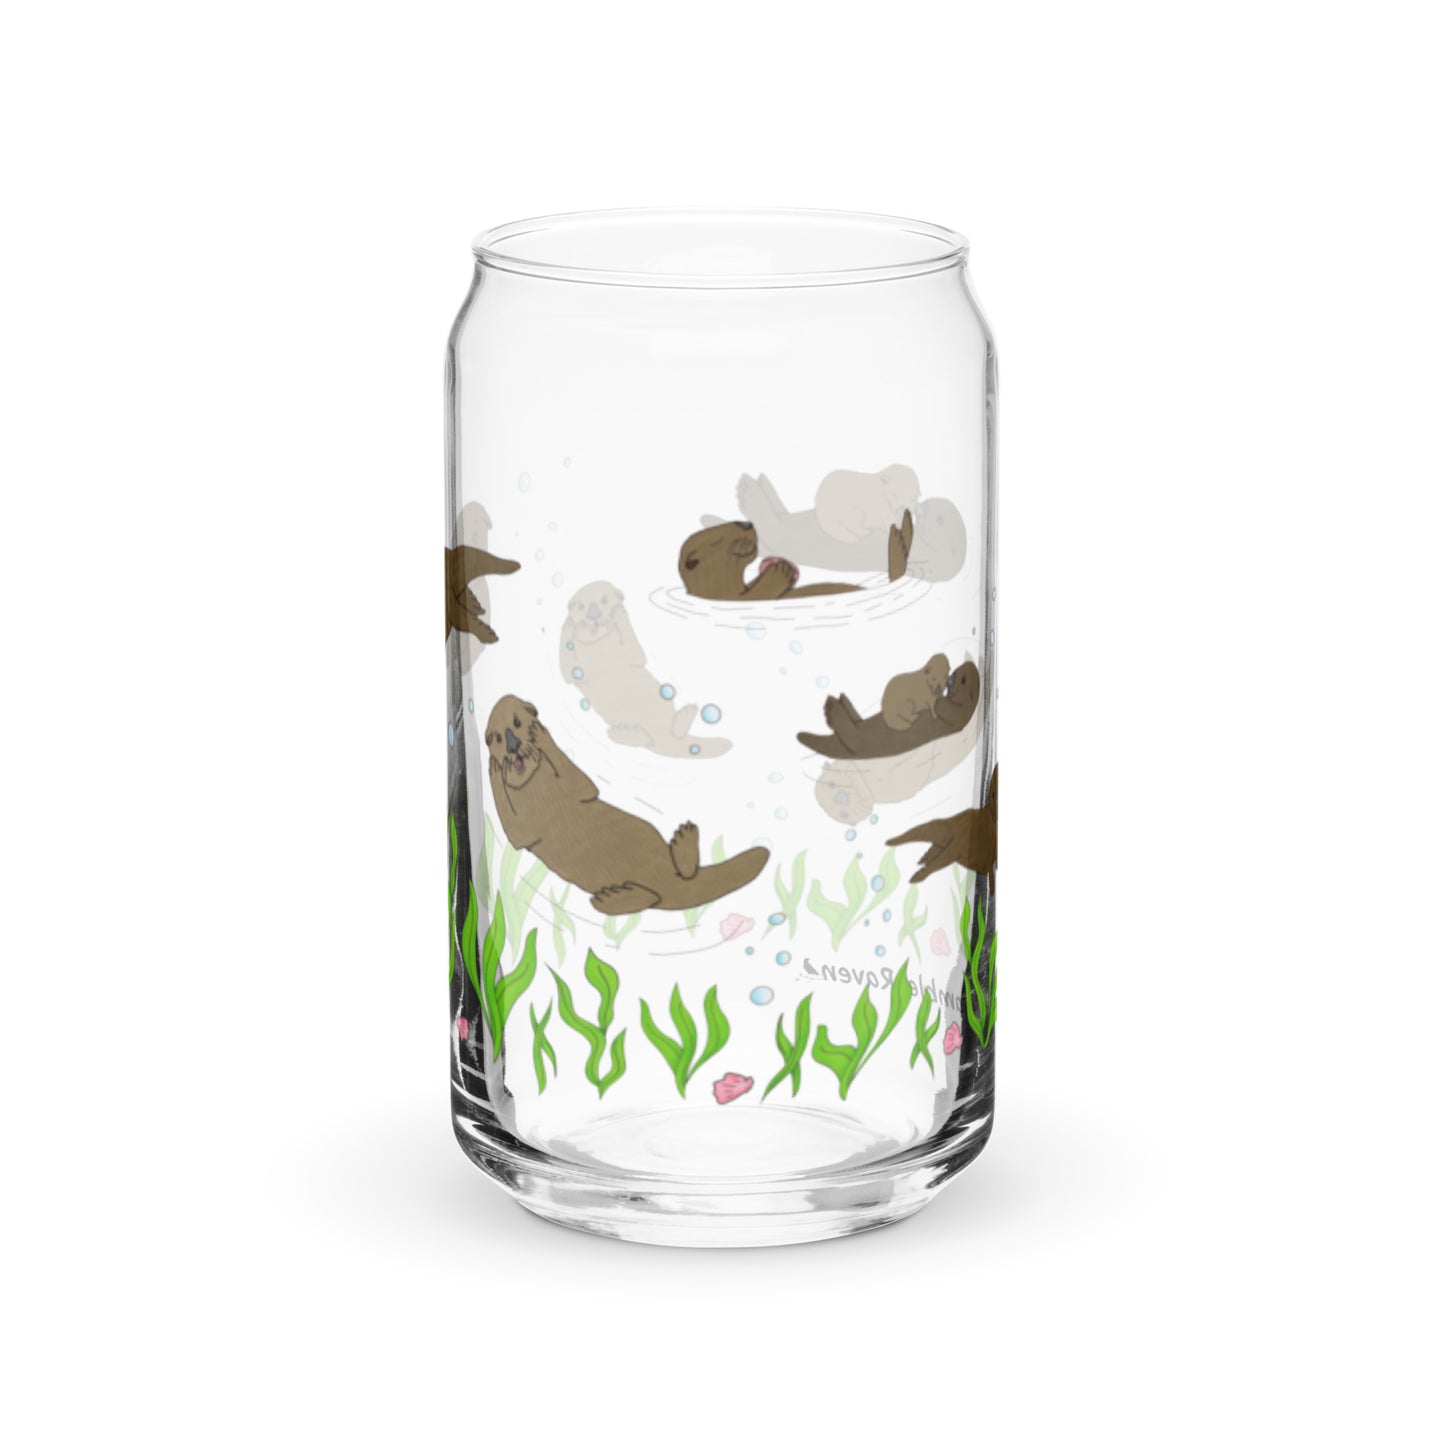 Can-shaped glass holds 16 fluid ounces. Has a design of sea otters swimming above the seaweed with bubble and shell accents. Left side view.